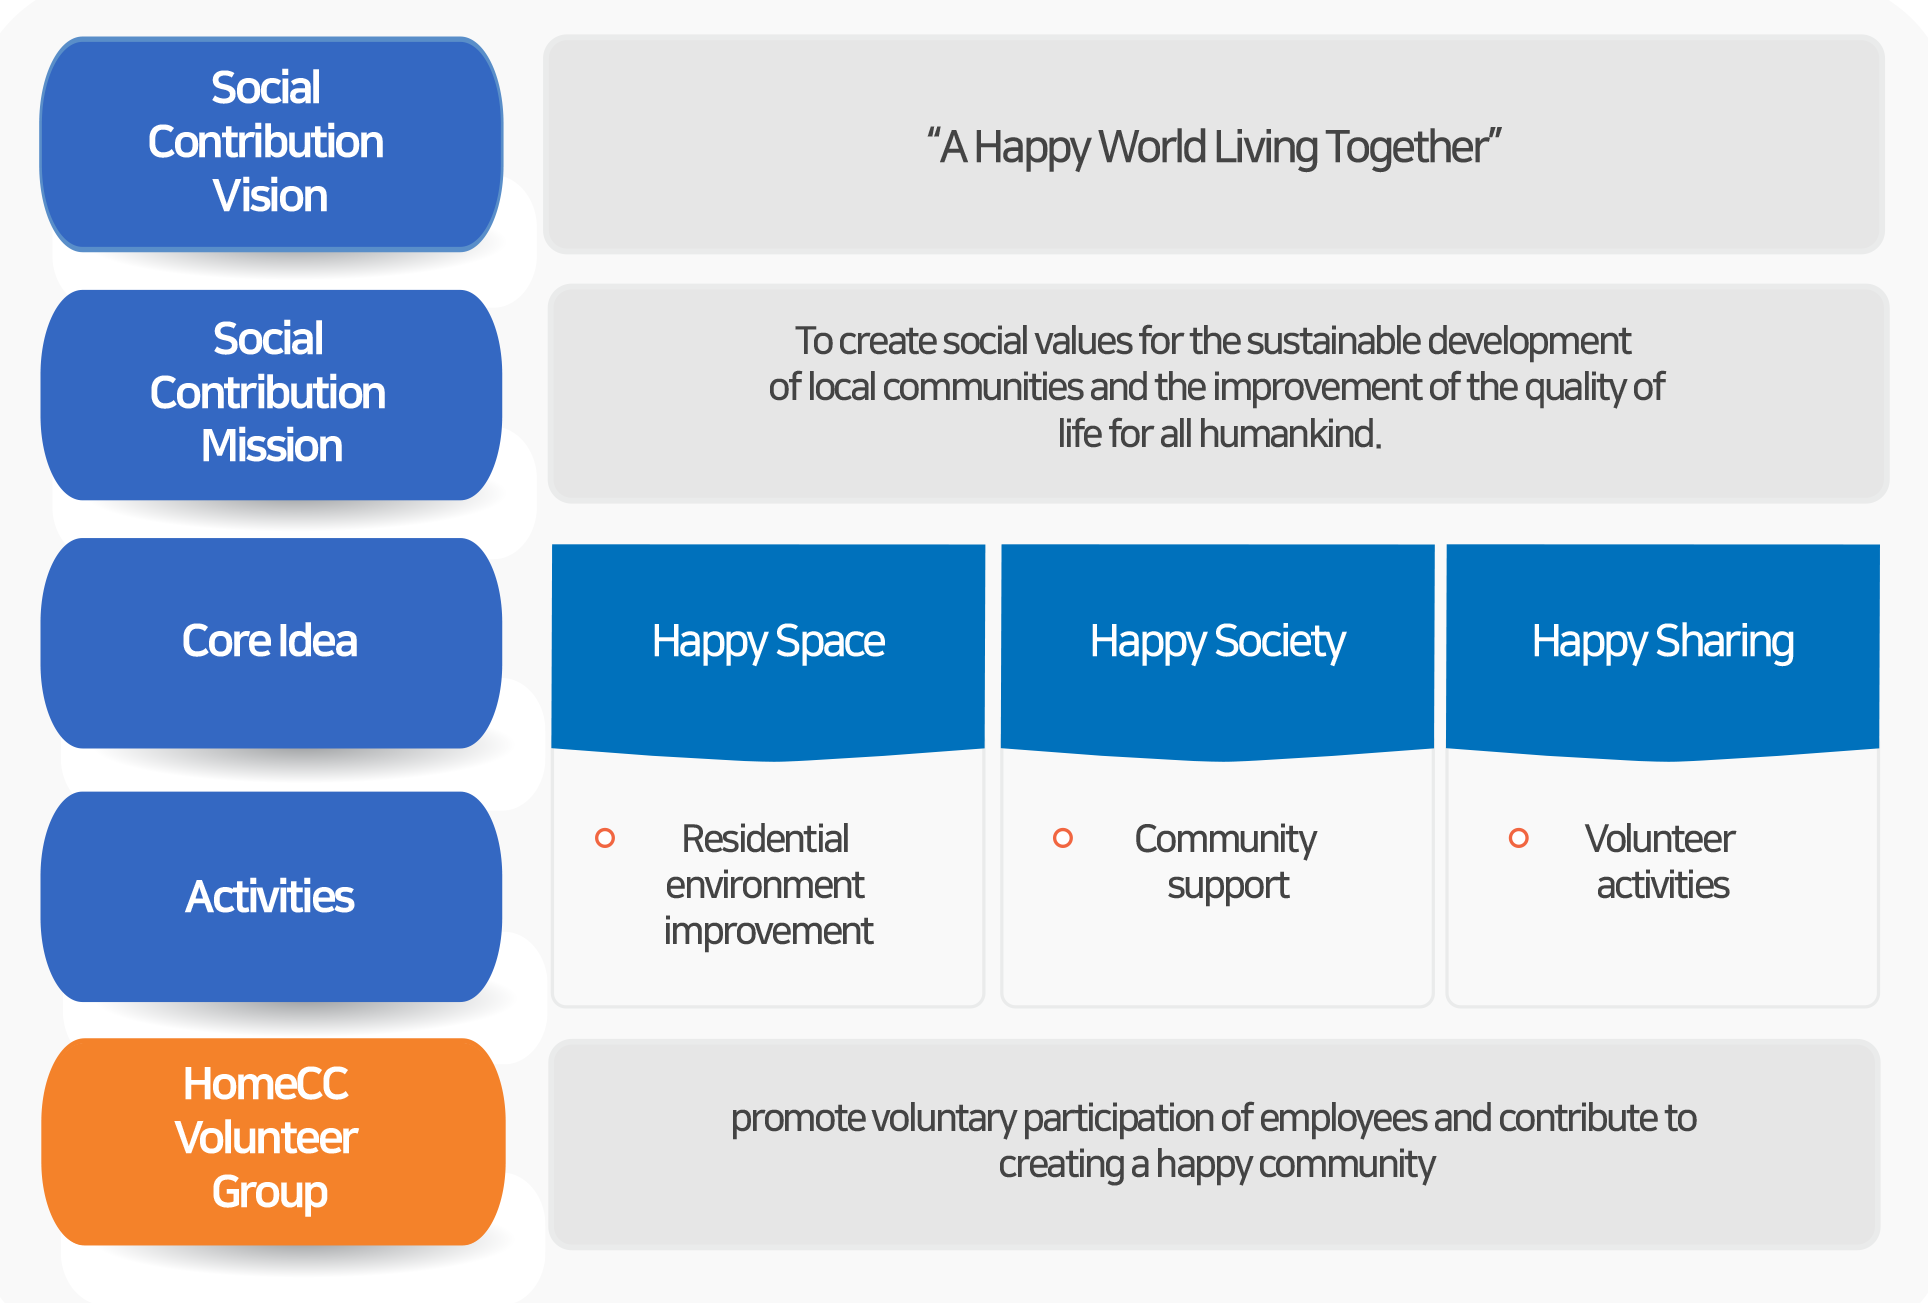 Social Contribution Strategy Map